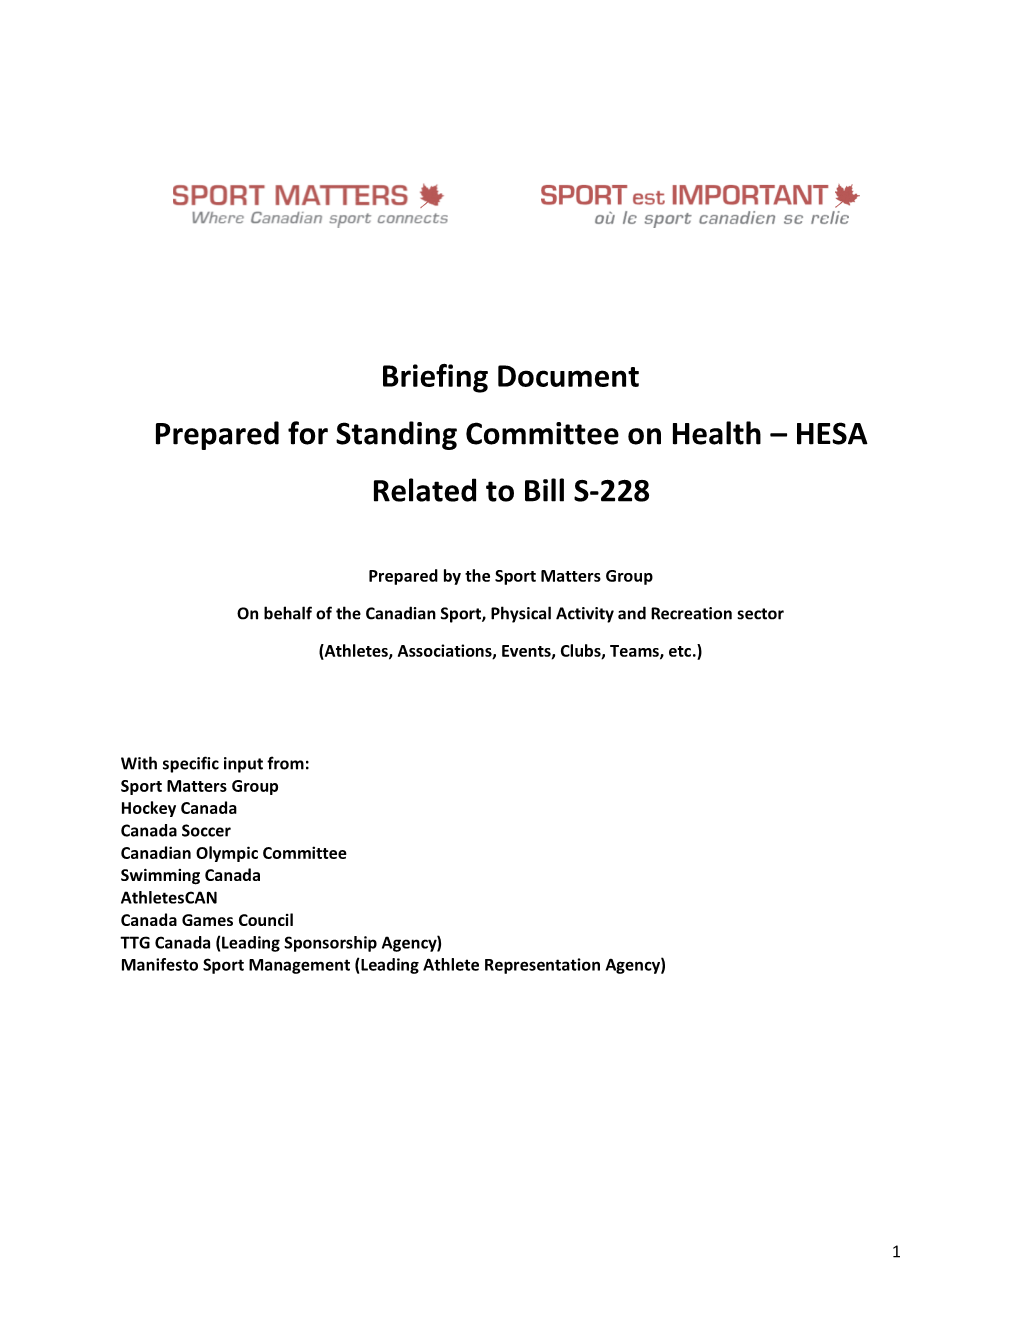 Briefing Document Prepared for Standing Committee on Health – HESA Related to Bill S-228